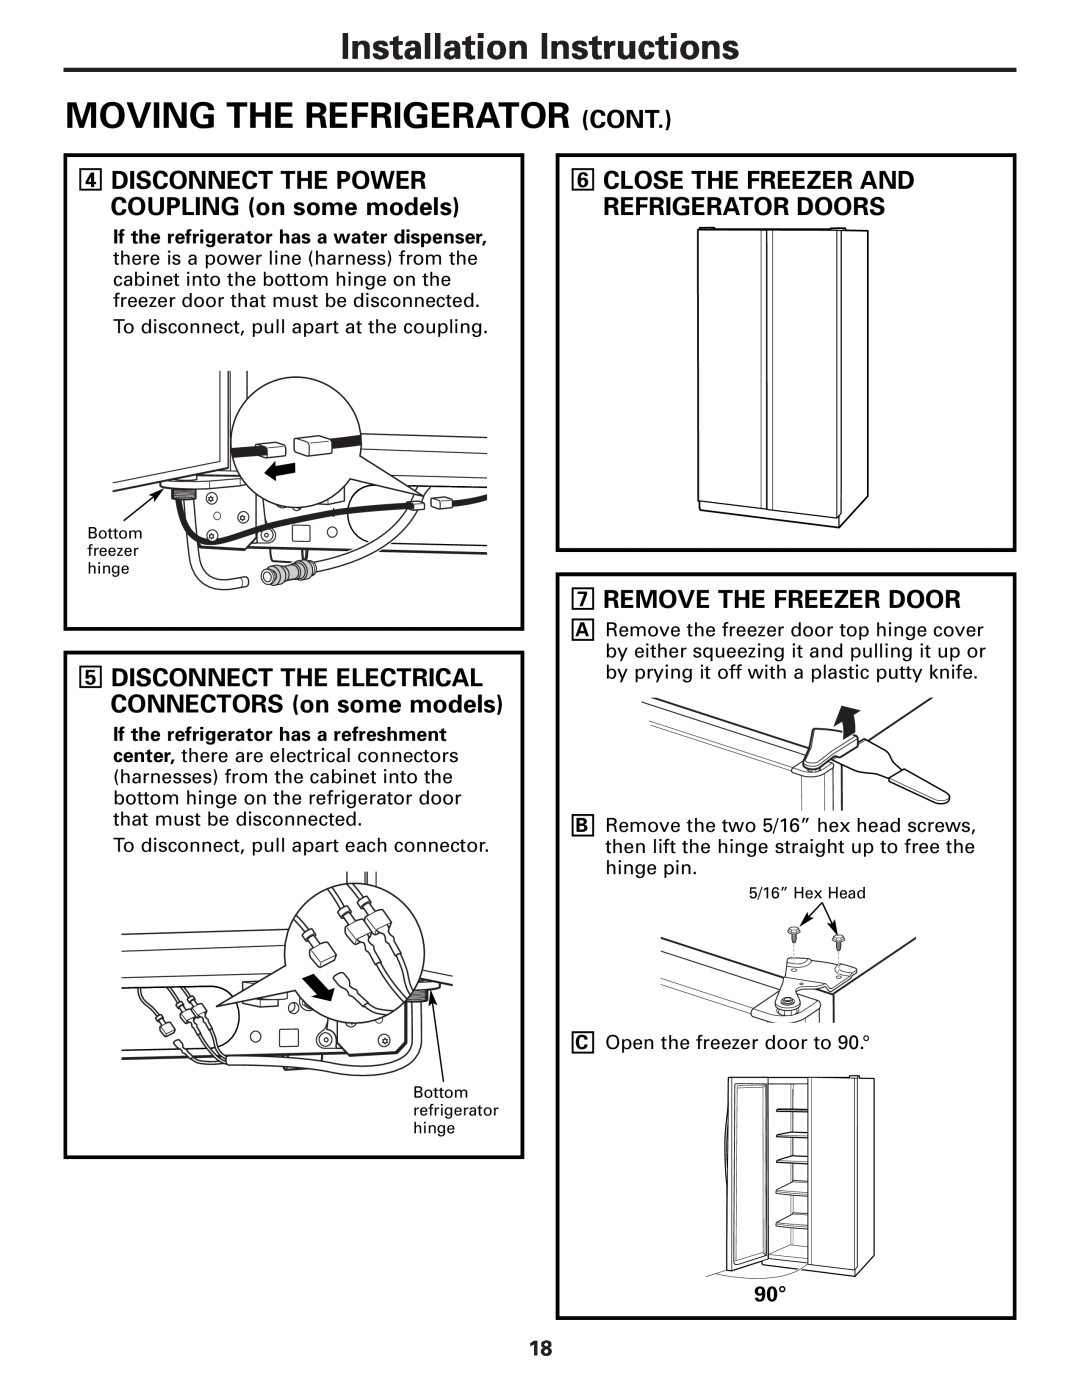 GE 25 and 27 installation instructions Installation Instructions, Moving The Refrigerator Cont, 7REMOVE THE FREEZER DOOR 